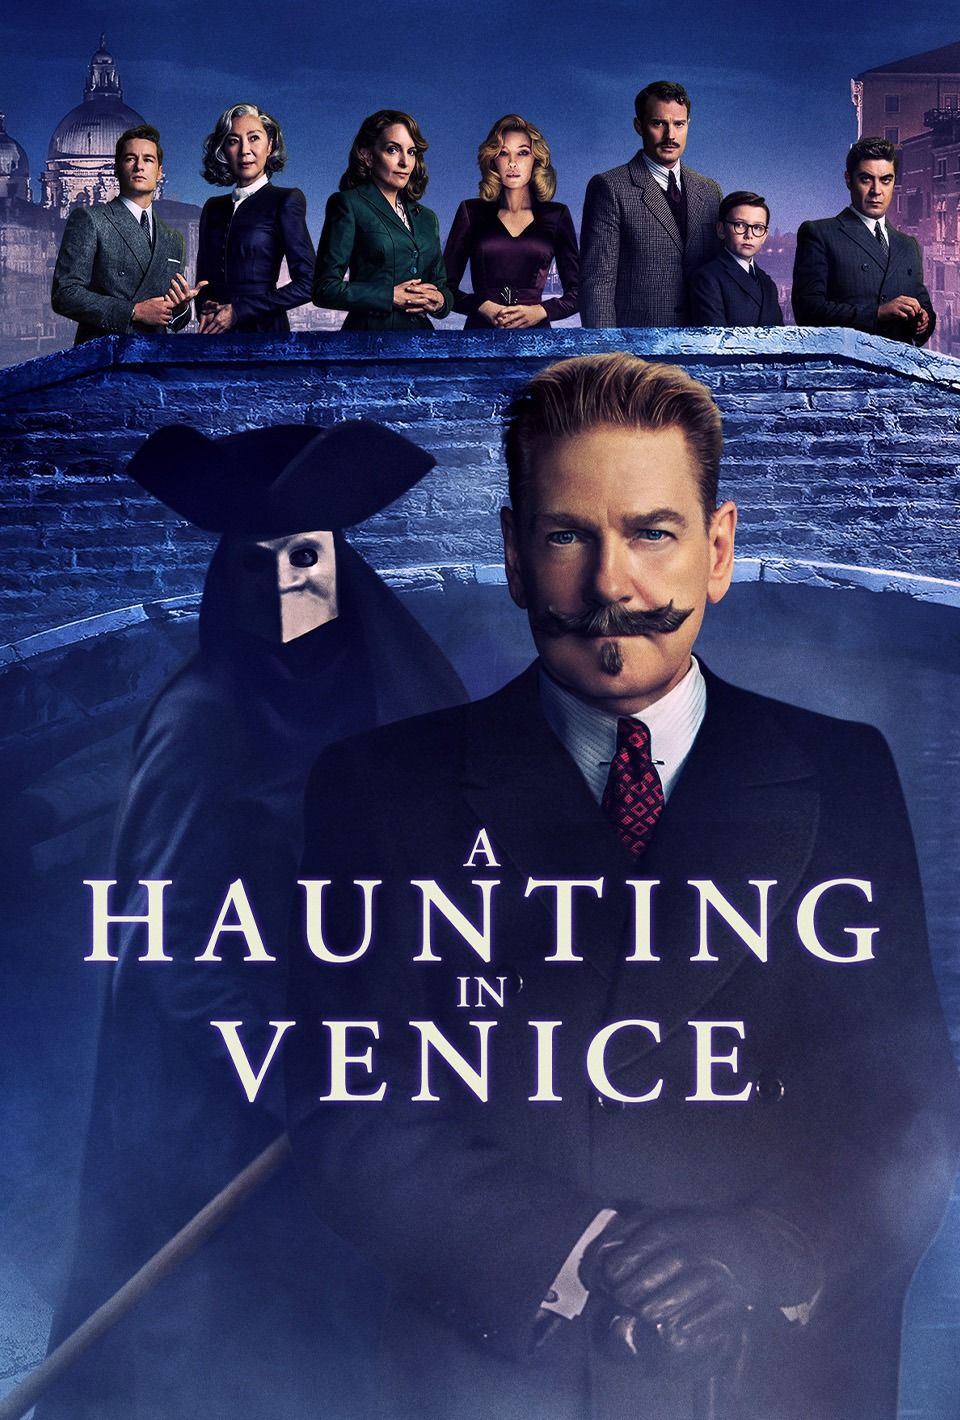 Cover Art for "A Haunting in Venice